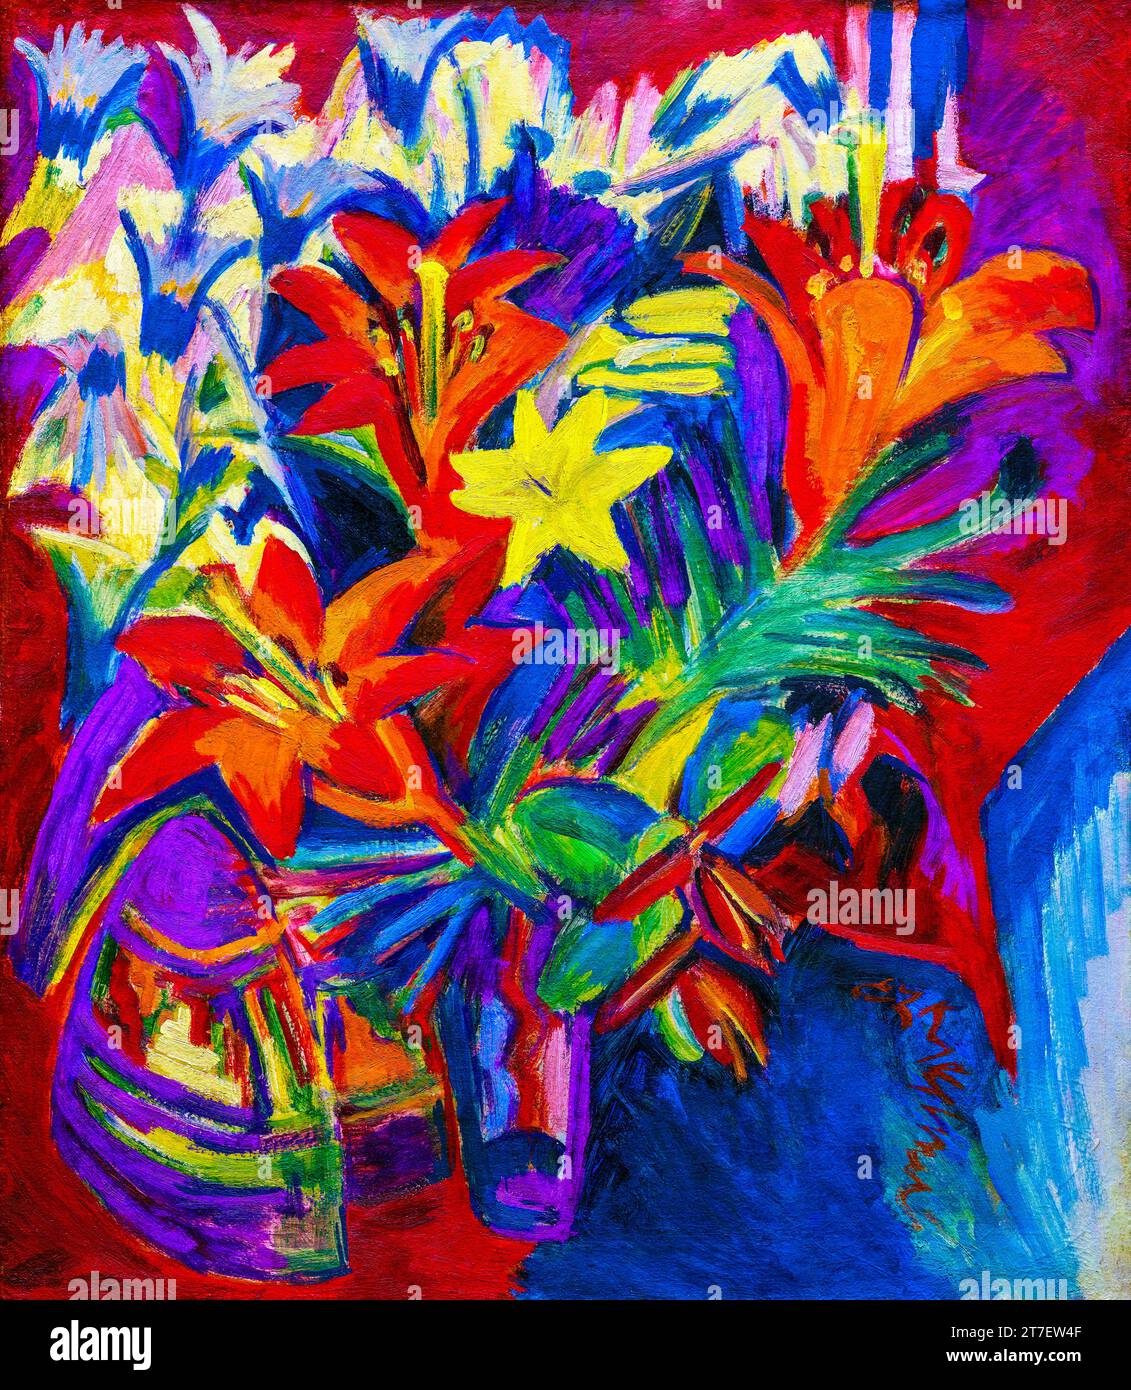 Ernst Ludwig Kirchner's Still Life with Lilies  famous painting. Original from the Dallas Museum of Art. Stock Photo